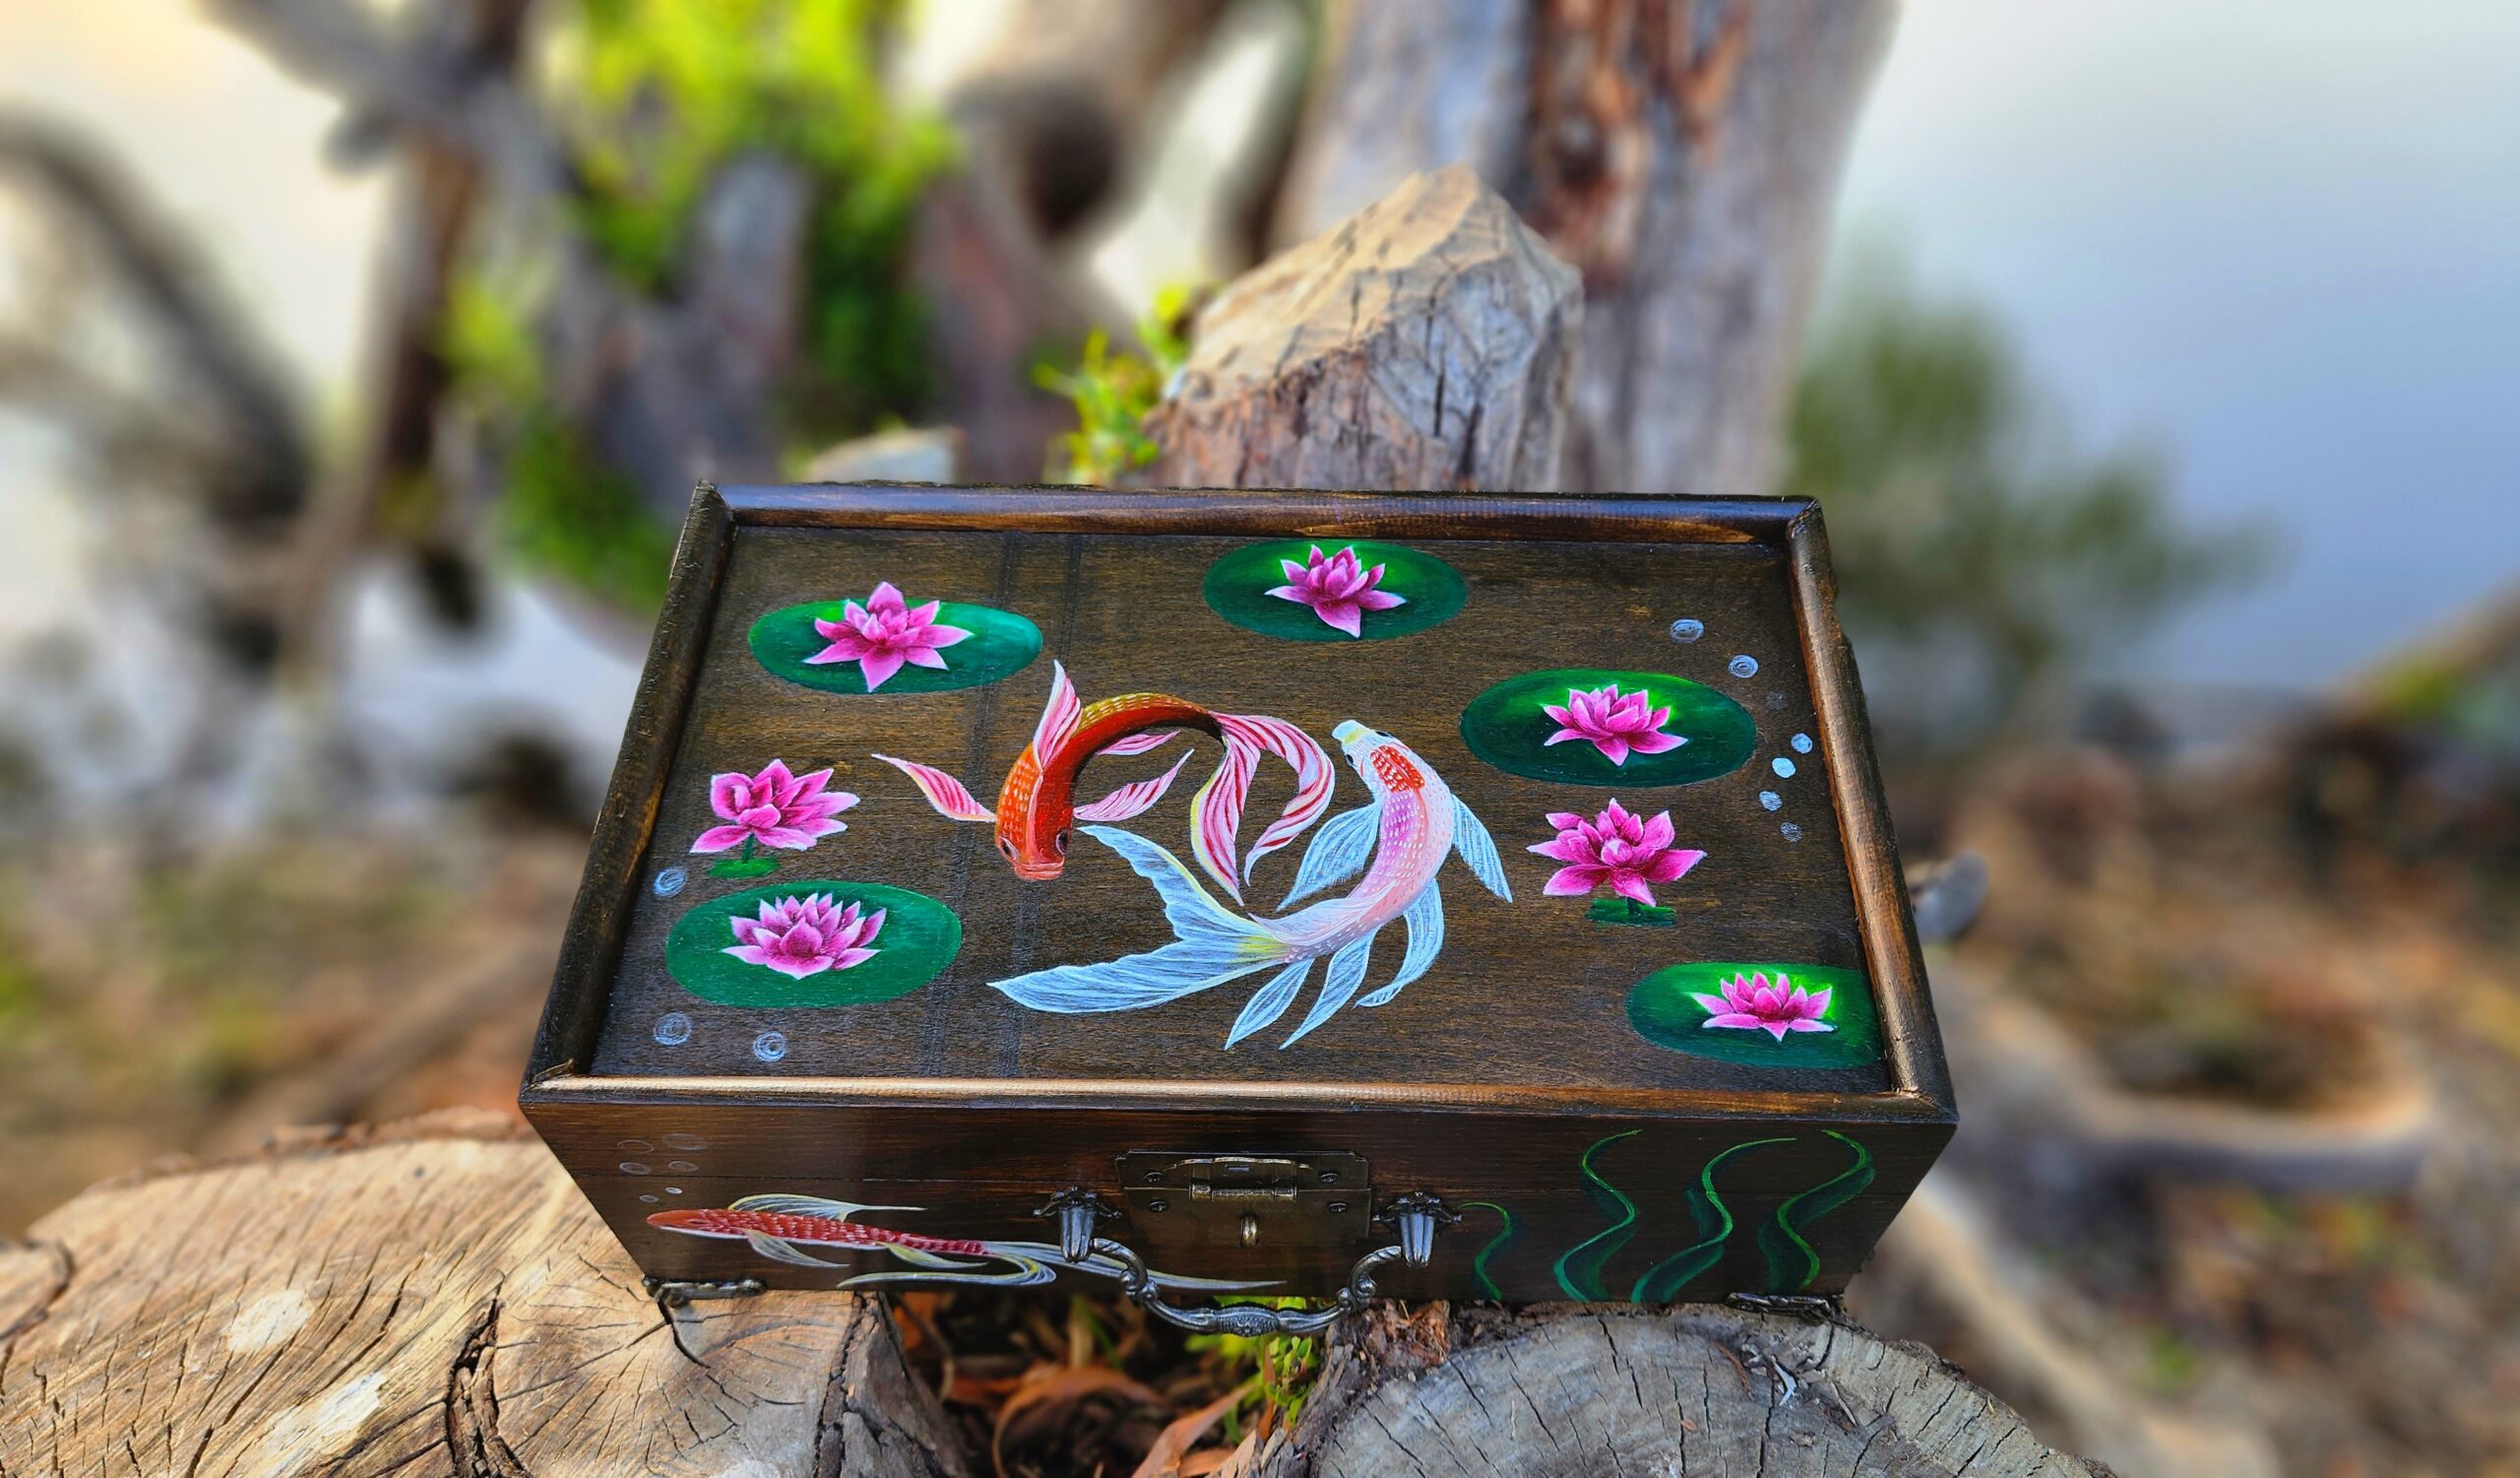 Beautiful handpainted trinket boxes with metal feet and a mirror. This cute trinket box is an ideal gift for a special loved one. You can store jewelry such as rings, necklaces, bracelets, or anything you would like to keep in a particular place, especially in this lovely and artistic trinket box. Not rings included.